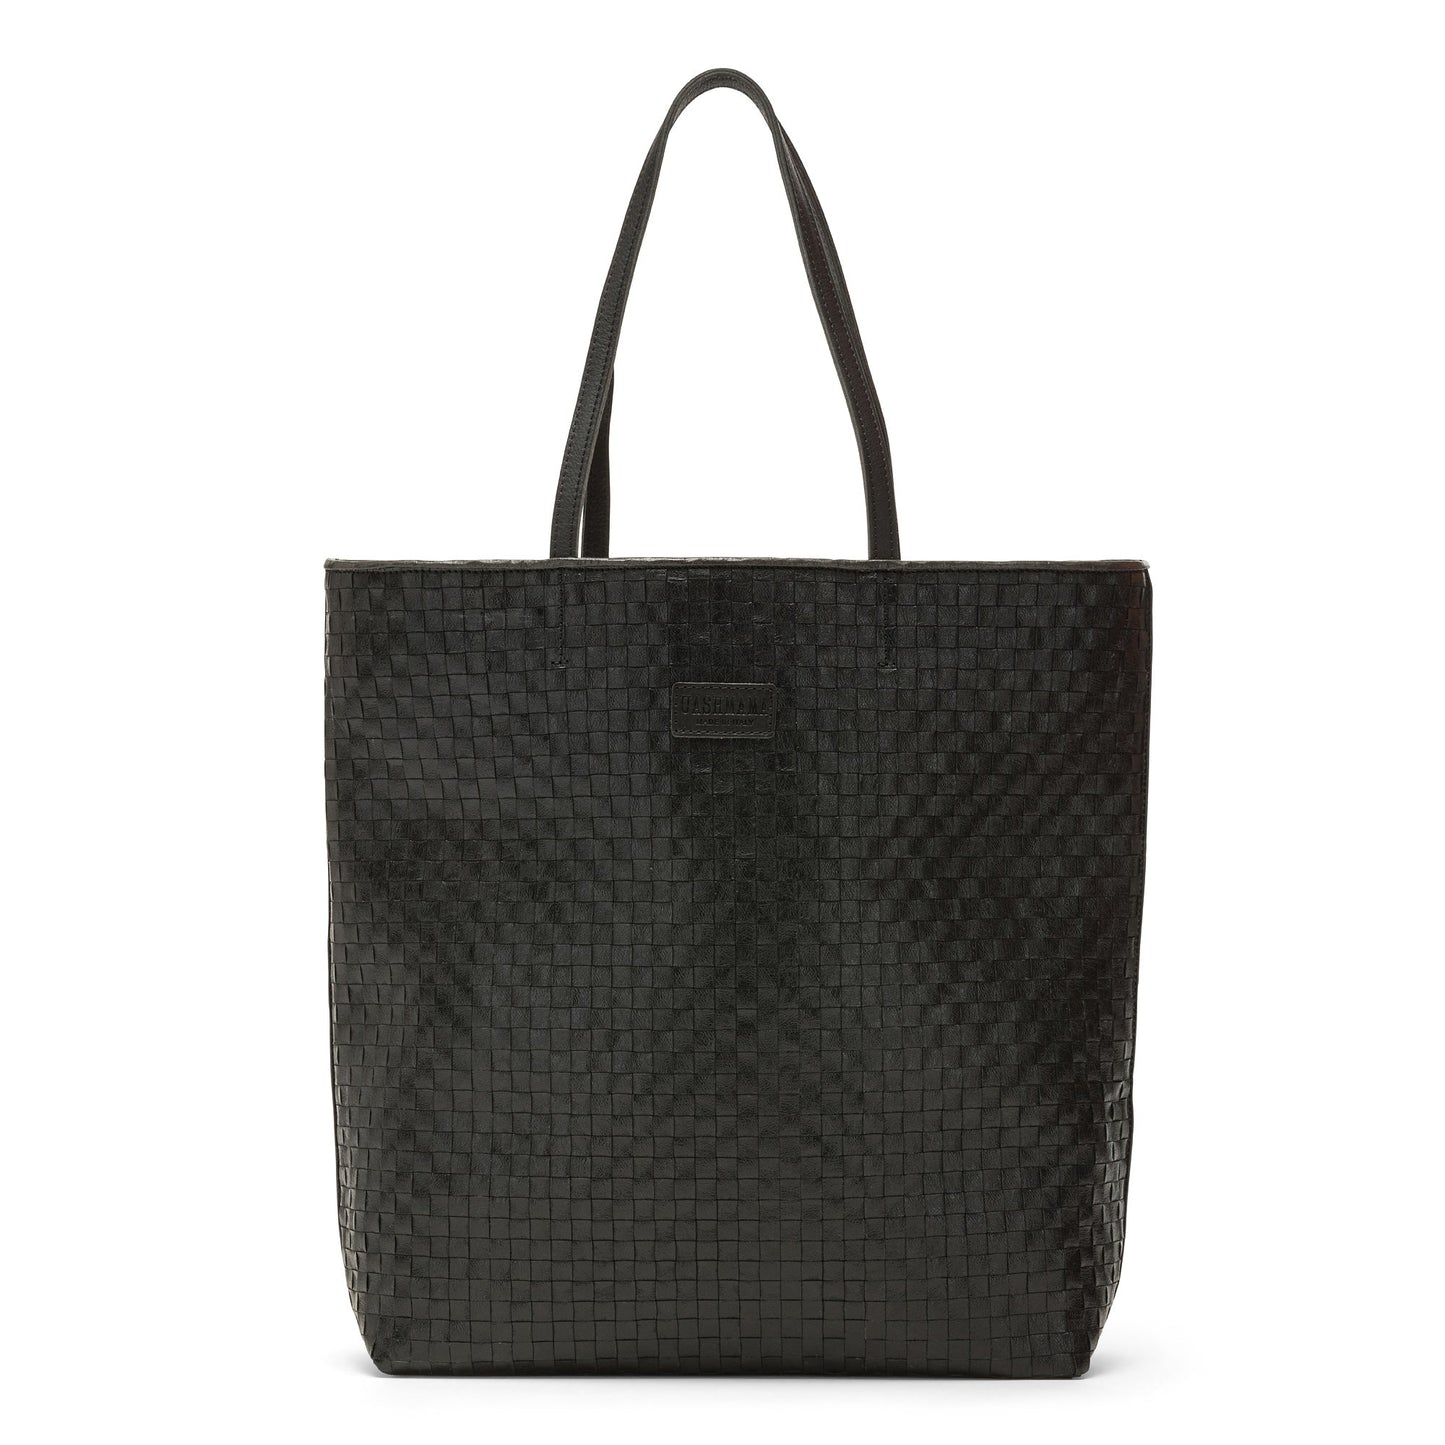 TOSCA OVERSIZED TOTE BAG WOVEN